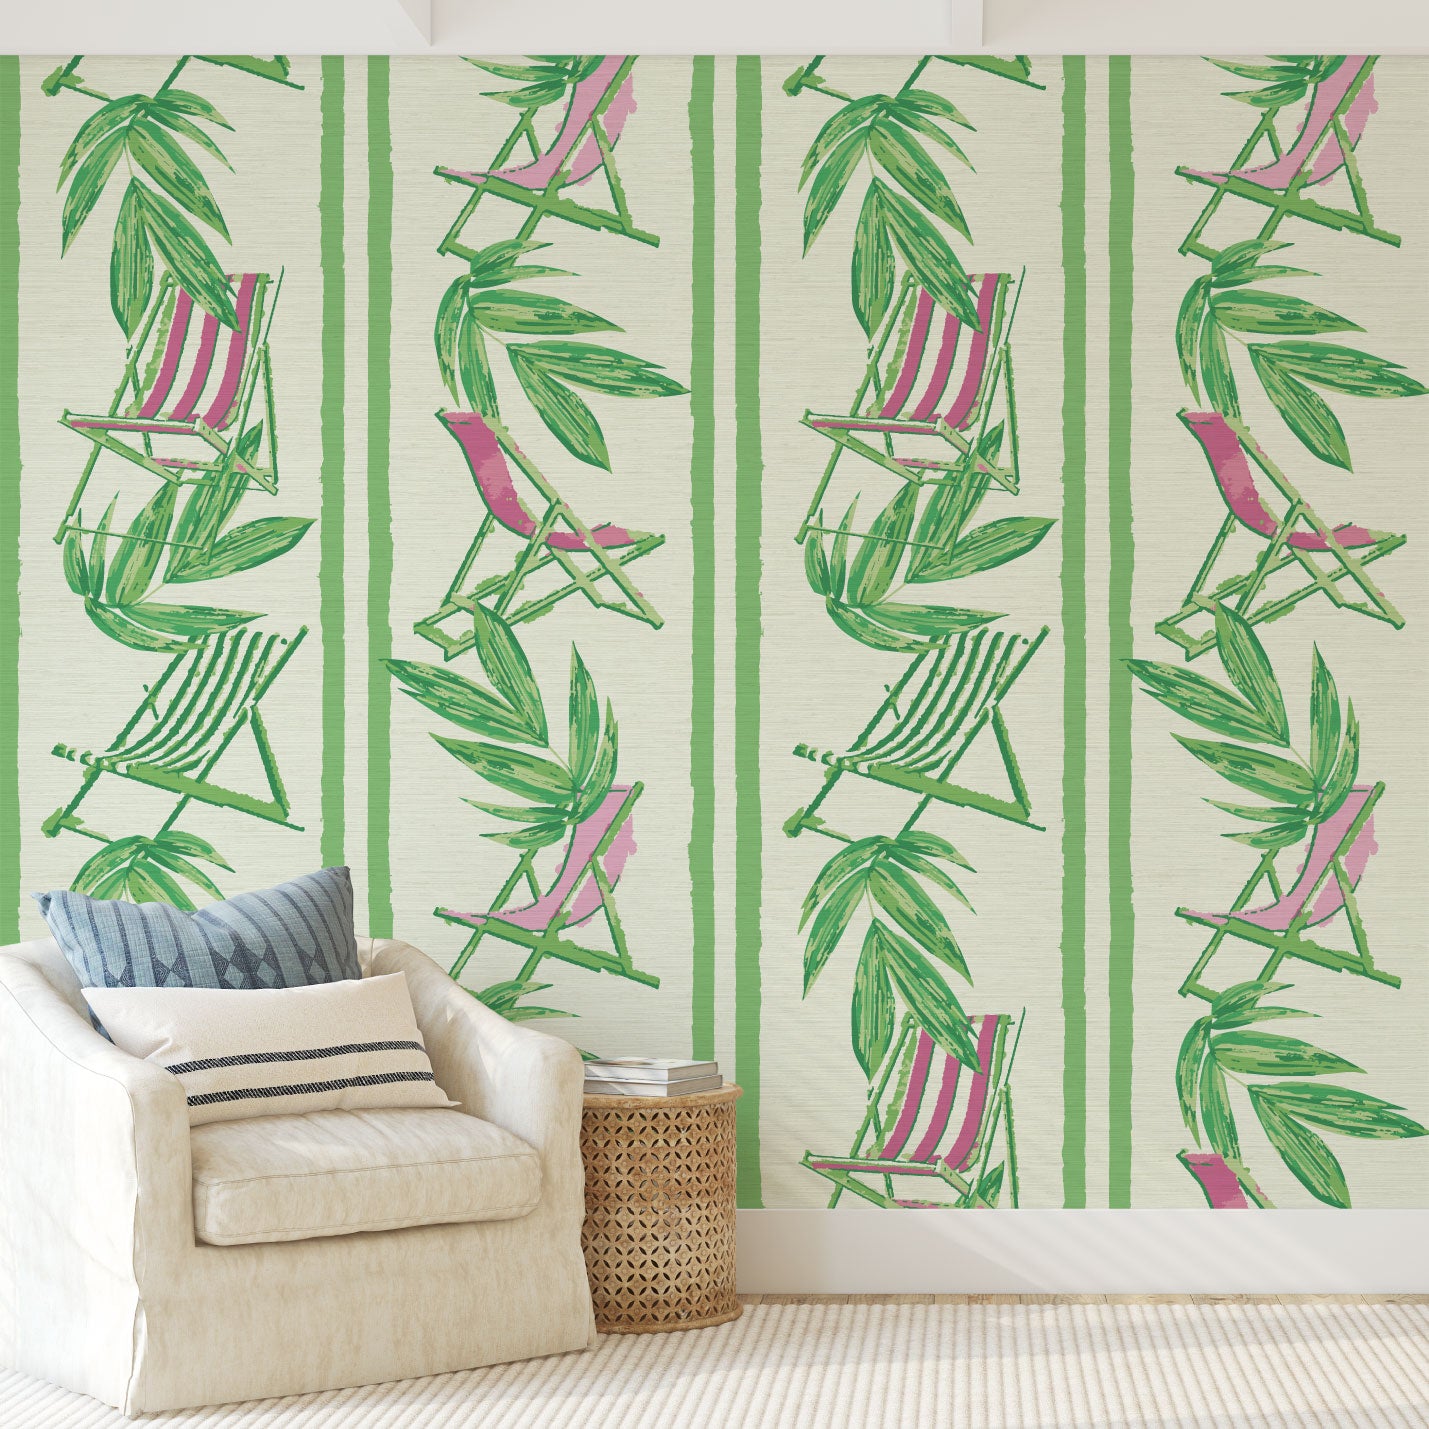 vertical linear grasscloth wallpaper print with a beachy design of green leaves and stripes paired with green and pink beach chairs arranged in a vertical oversized stripe Grasscloth Natural Textured Eco-Friendly Non-toxic High-quality  Sustainable practices Sustainability Interior Design Wall covering bold Seaside Coastal Seashore Waterfront Vacation home styling Retreat Relaxed beach vibes Beach cottage Shoreline Oceanfront Nautical living room sitting lounge